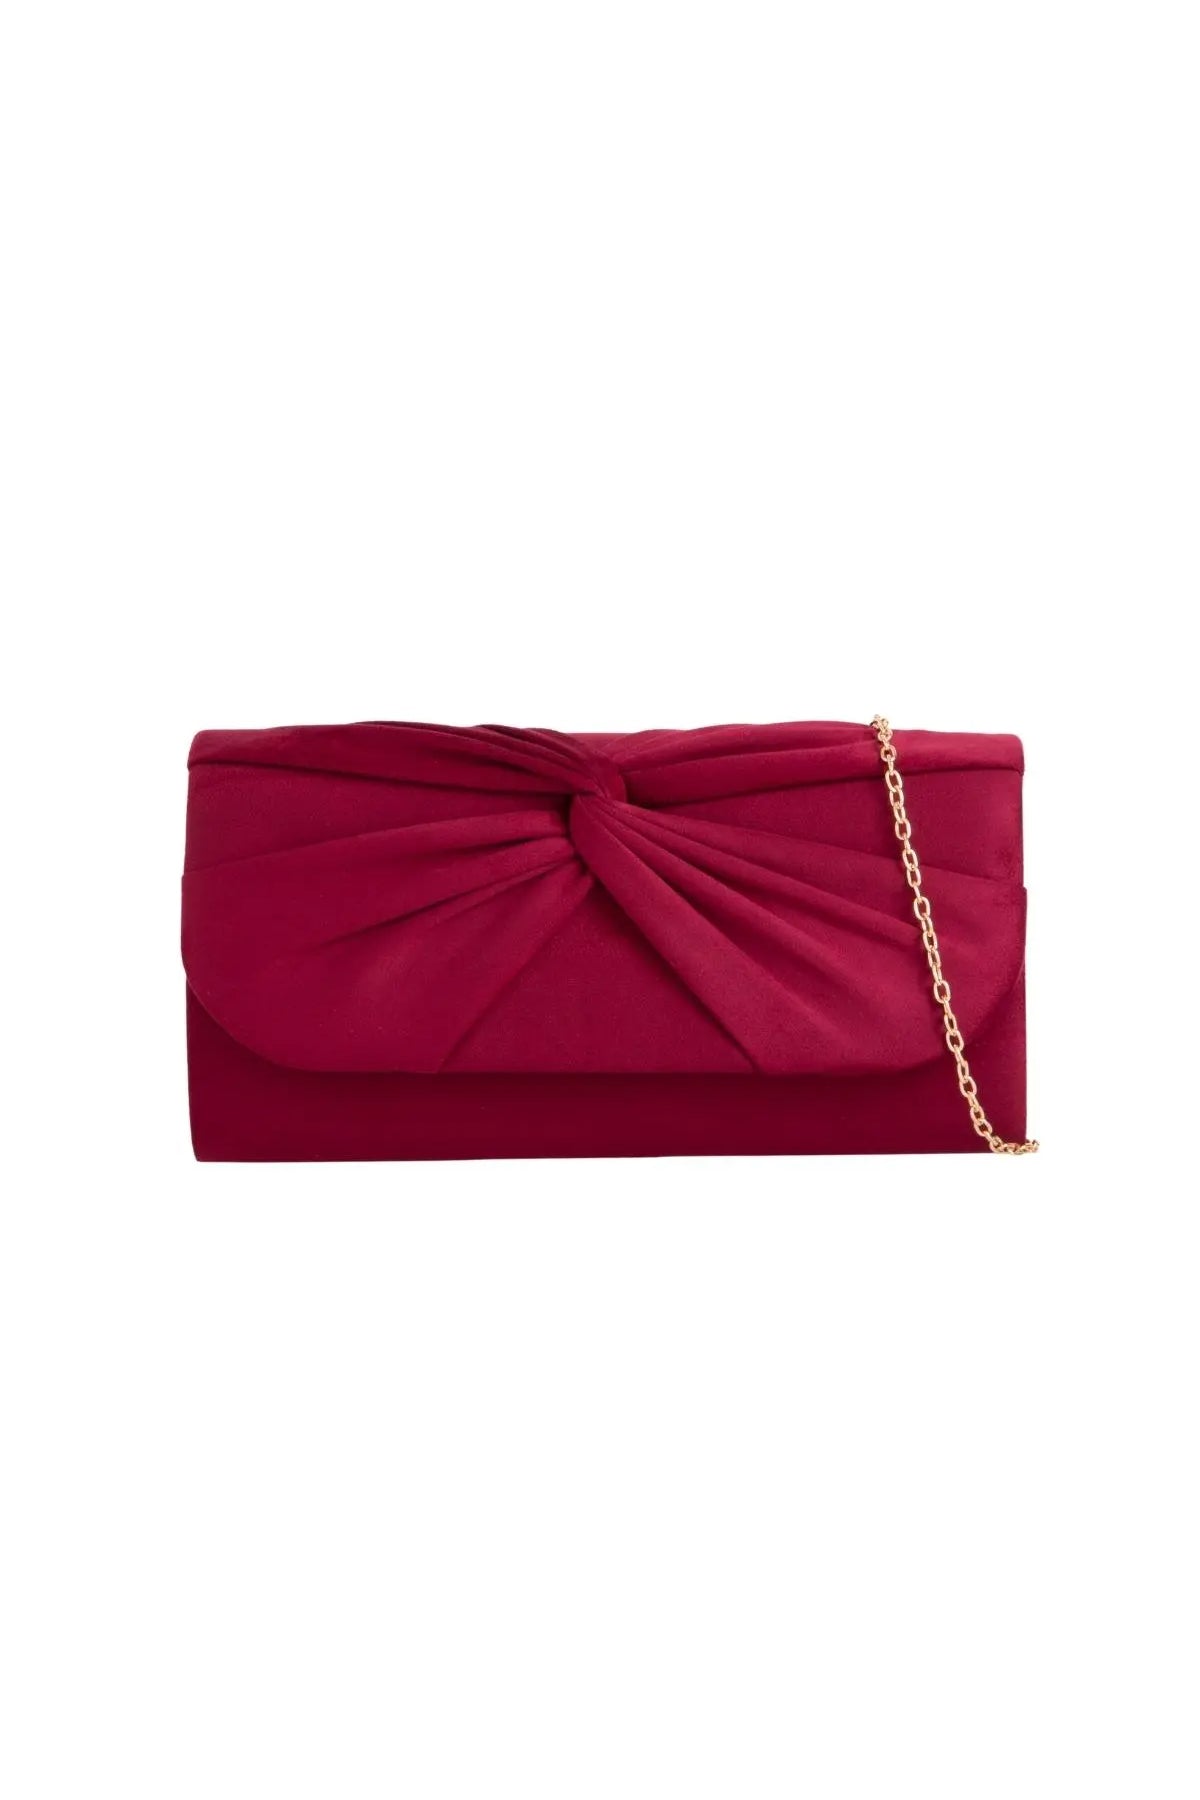 Burgundy Suede Clutch Bag with Knot Detail